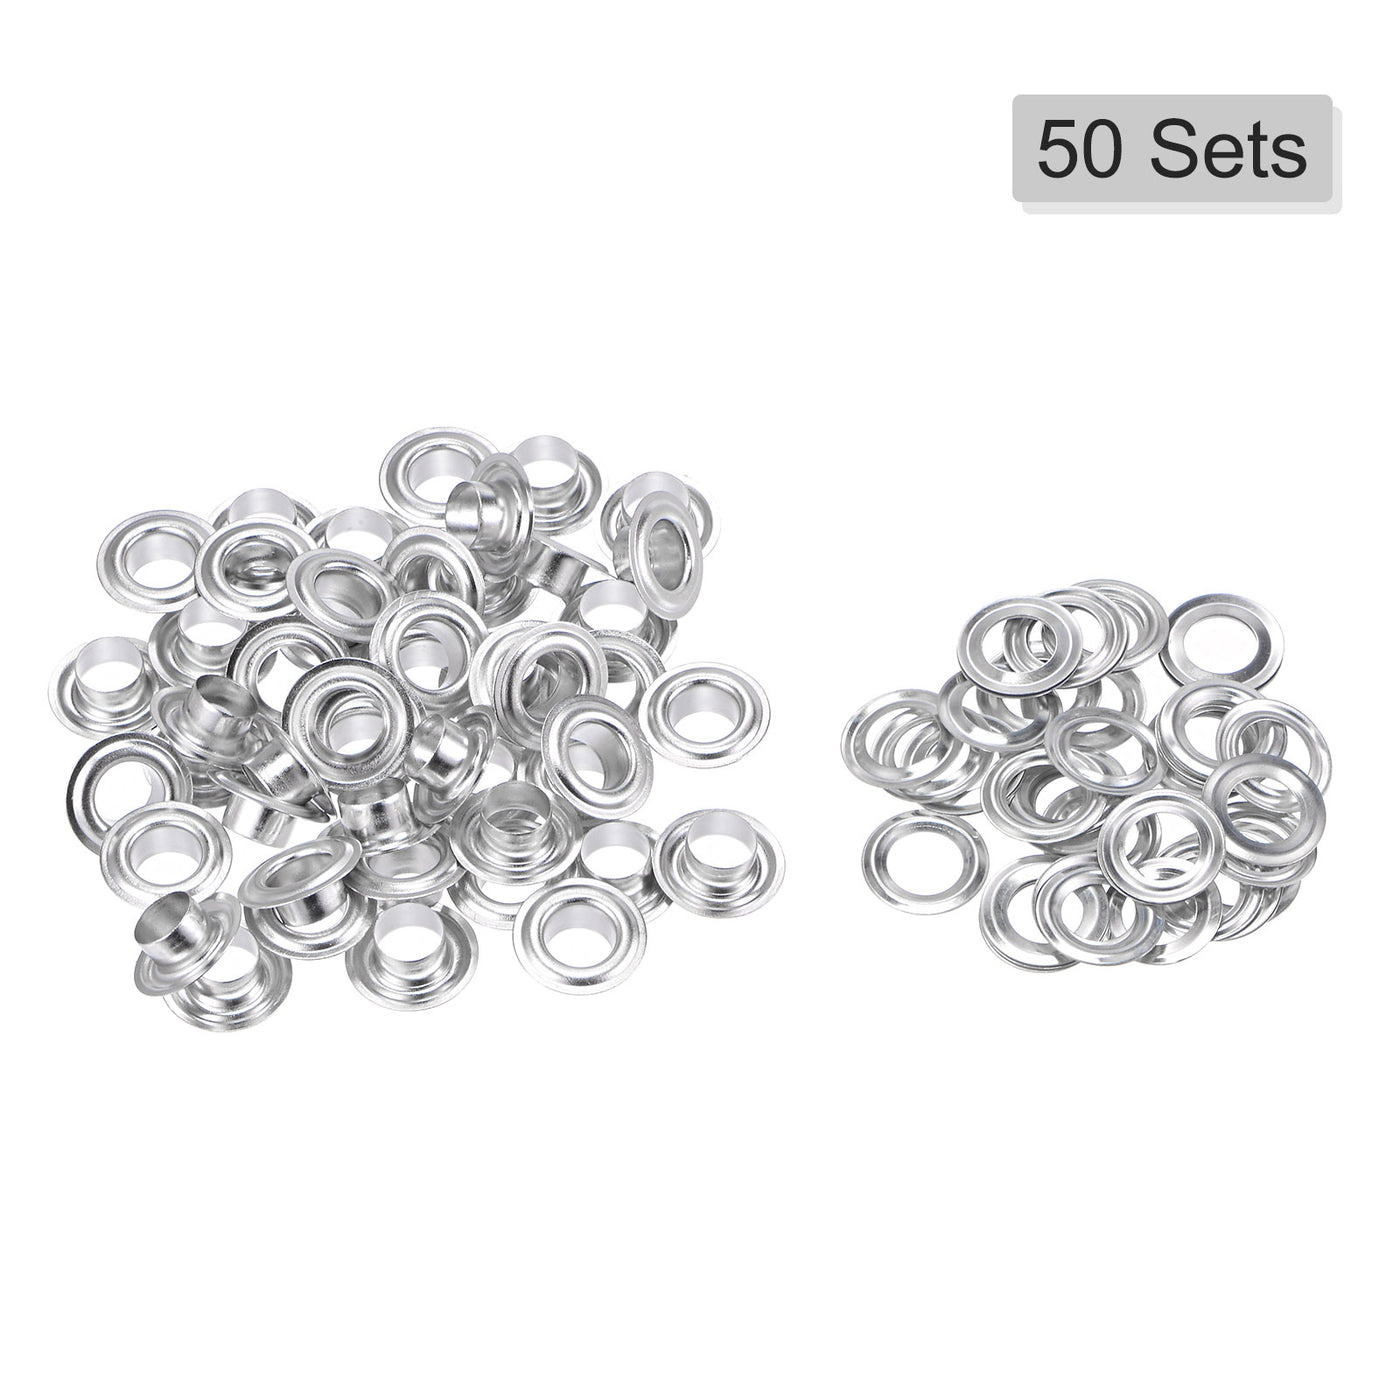 uxcell Uxcell 50Set 7.5mm Hole Copper Grommets Eyelets Silver Tone for Fabric Leather